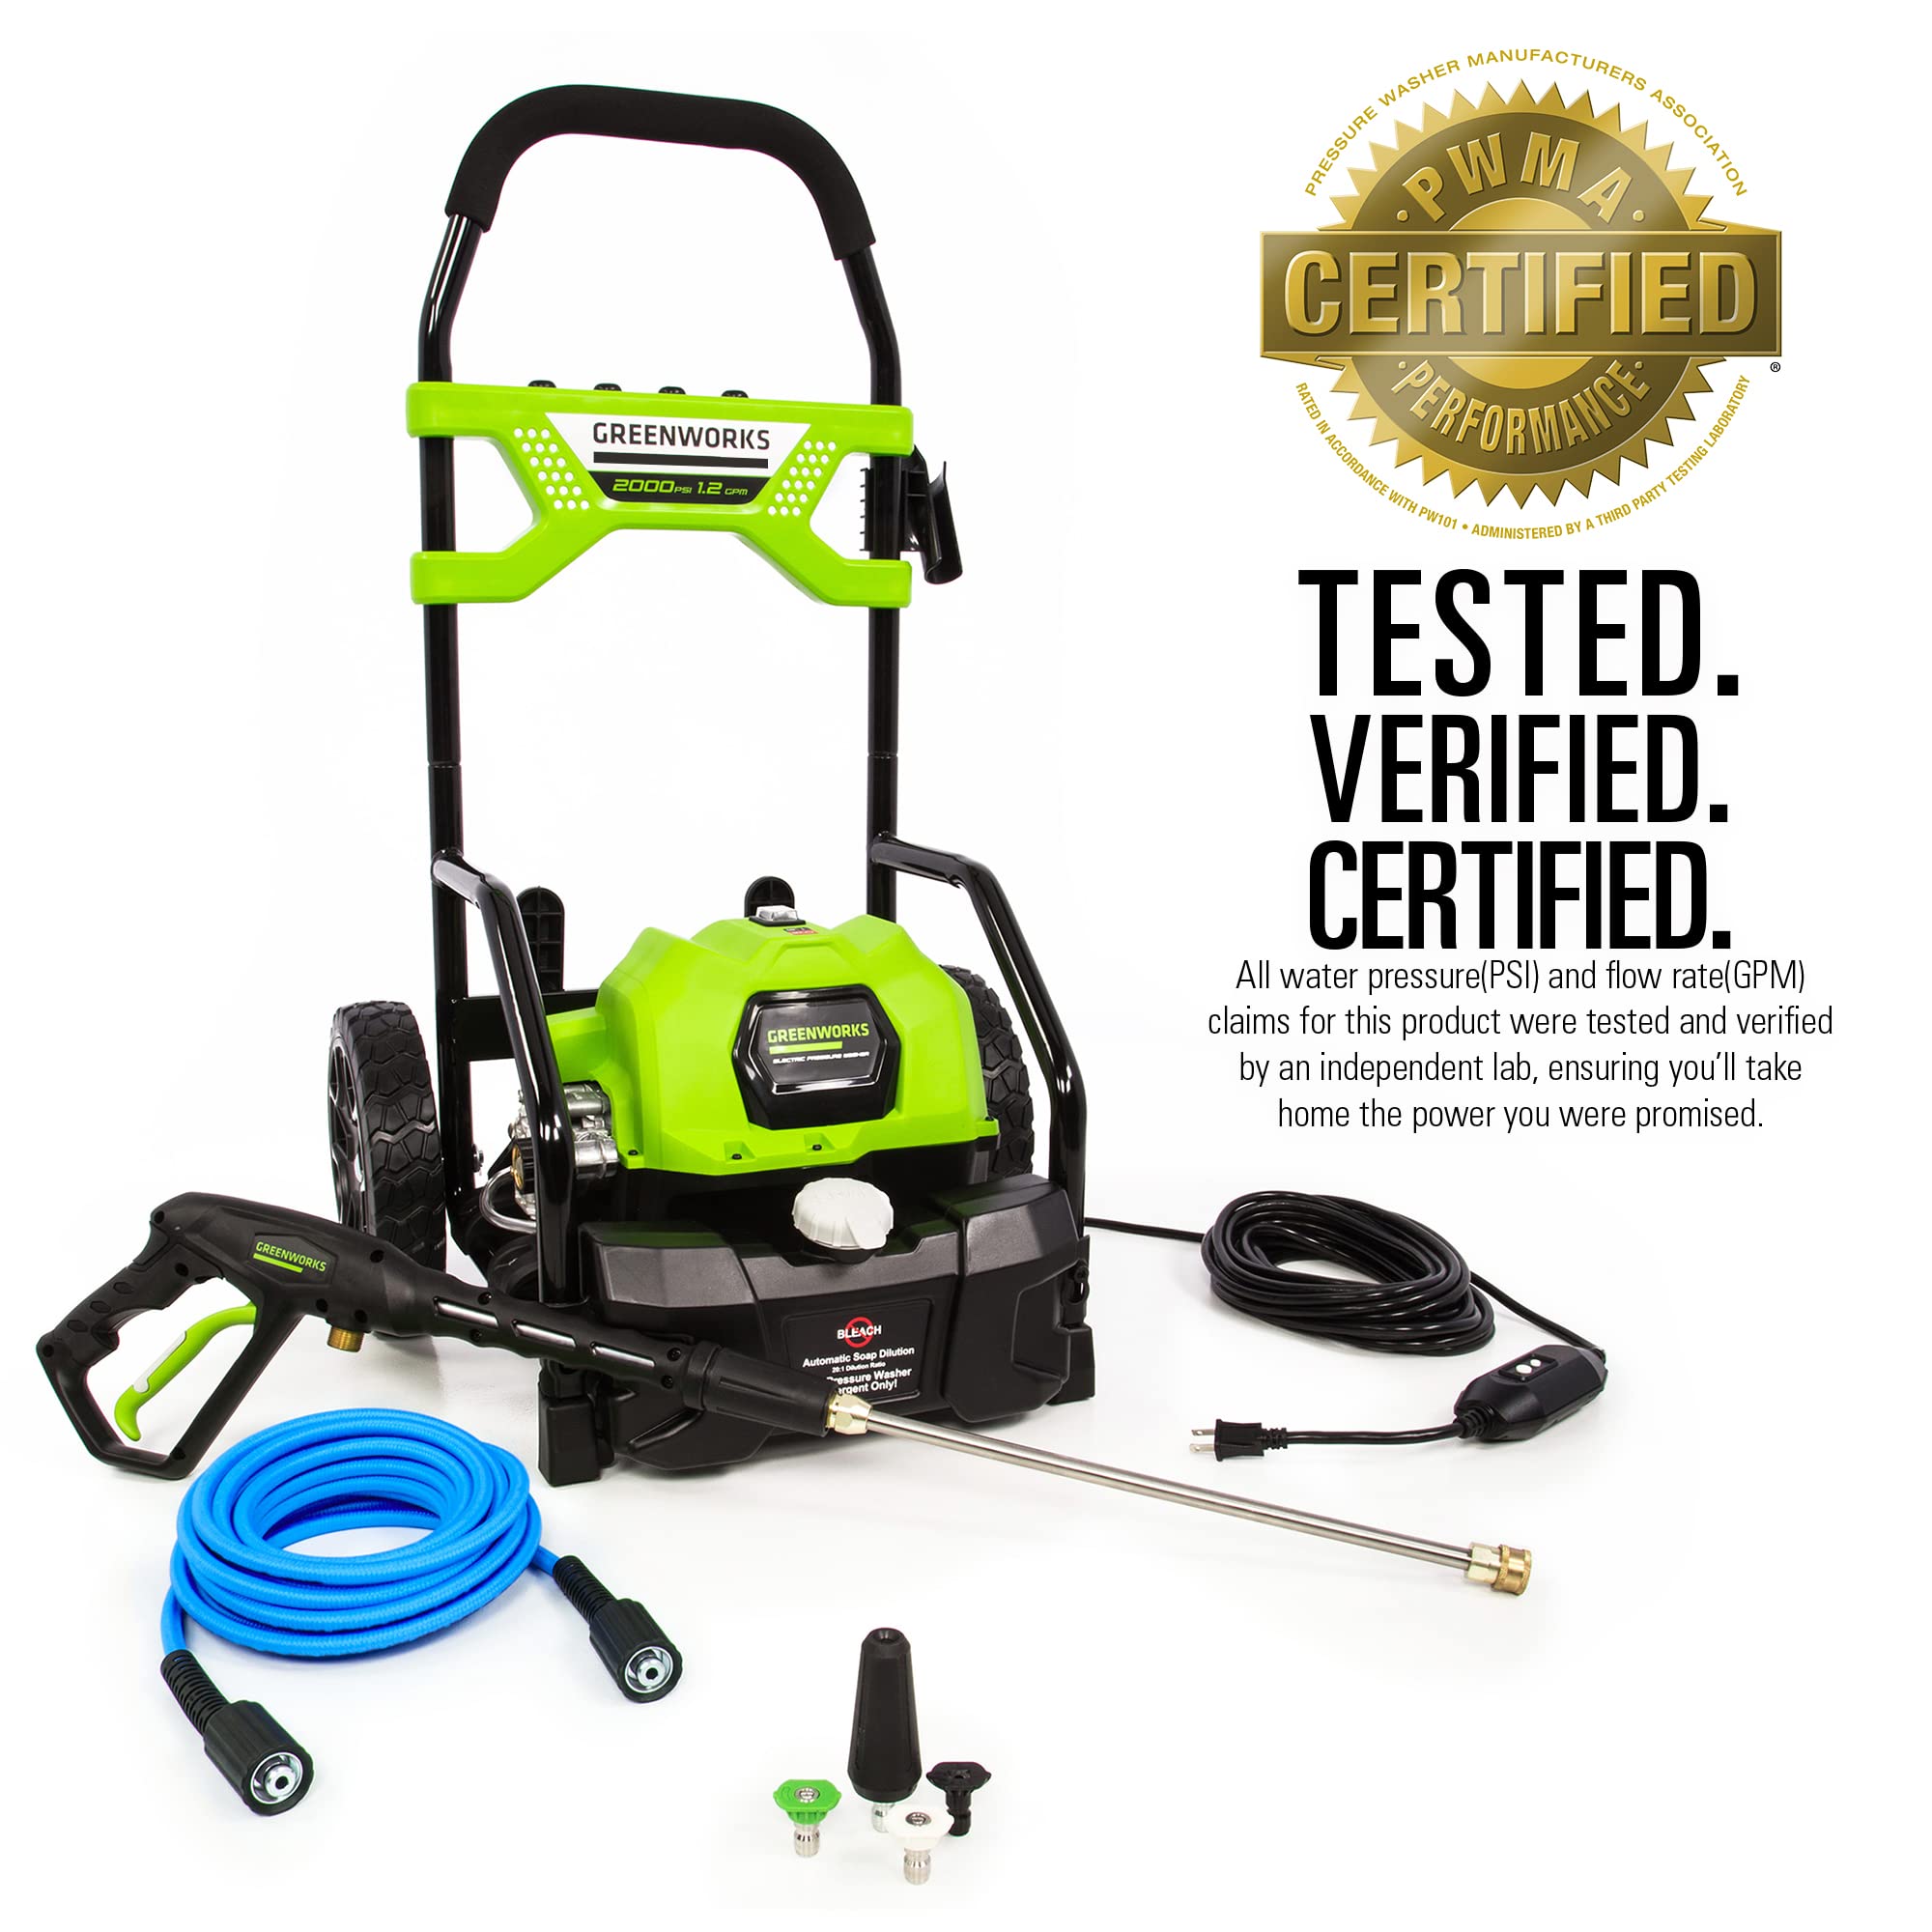 Greenworks 2000 PSI (1.2 GPM) Pressure Washer with 12” Surface Cleaner and Premium Foam Cannon